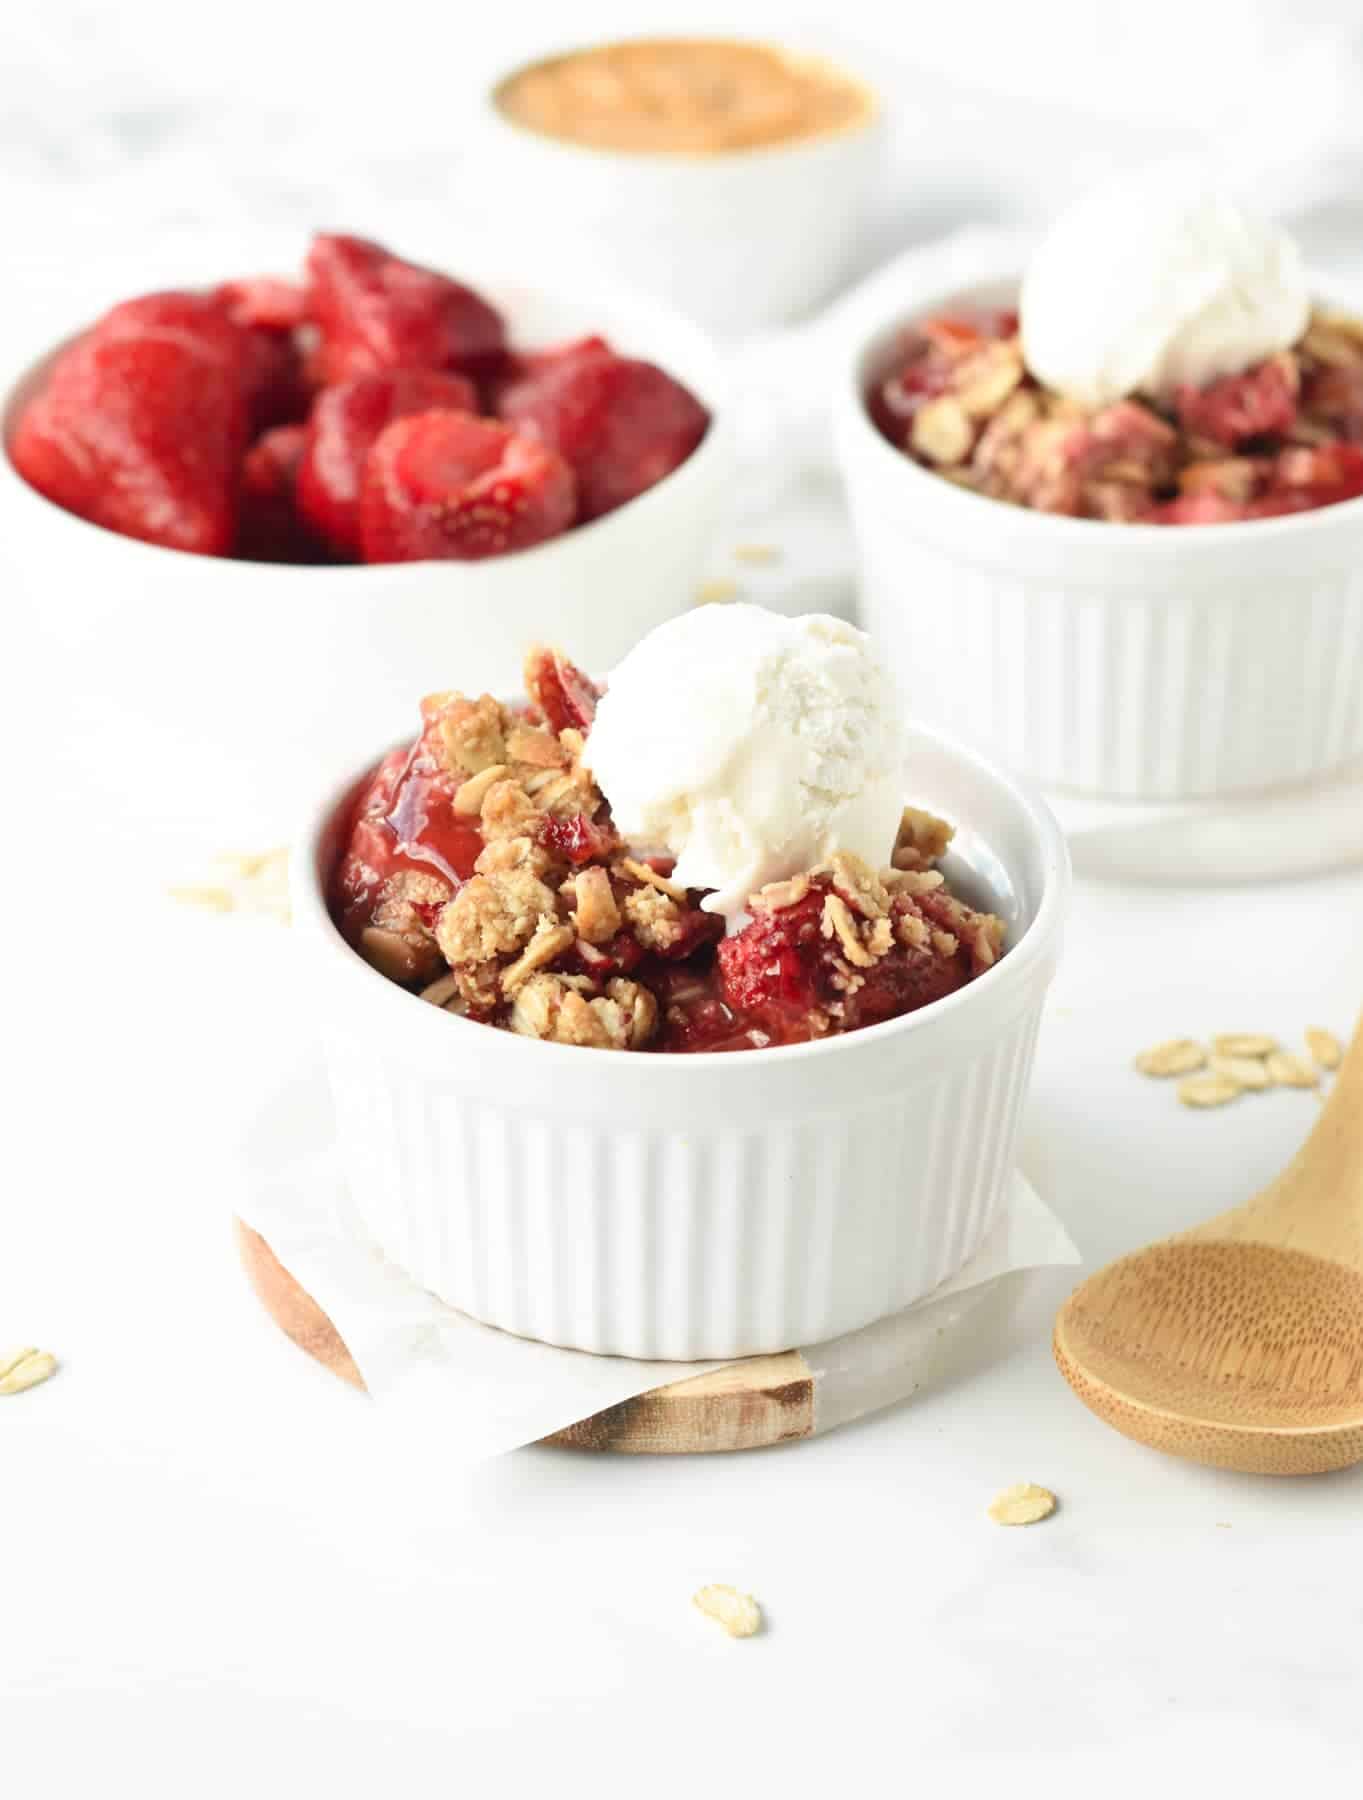 Strawberry Crisp in a small ramekin decorated with plant-based cream next to a wooden spoon.